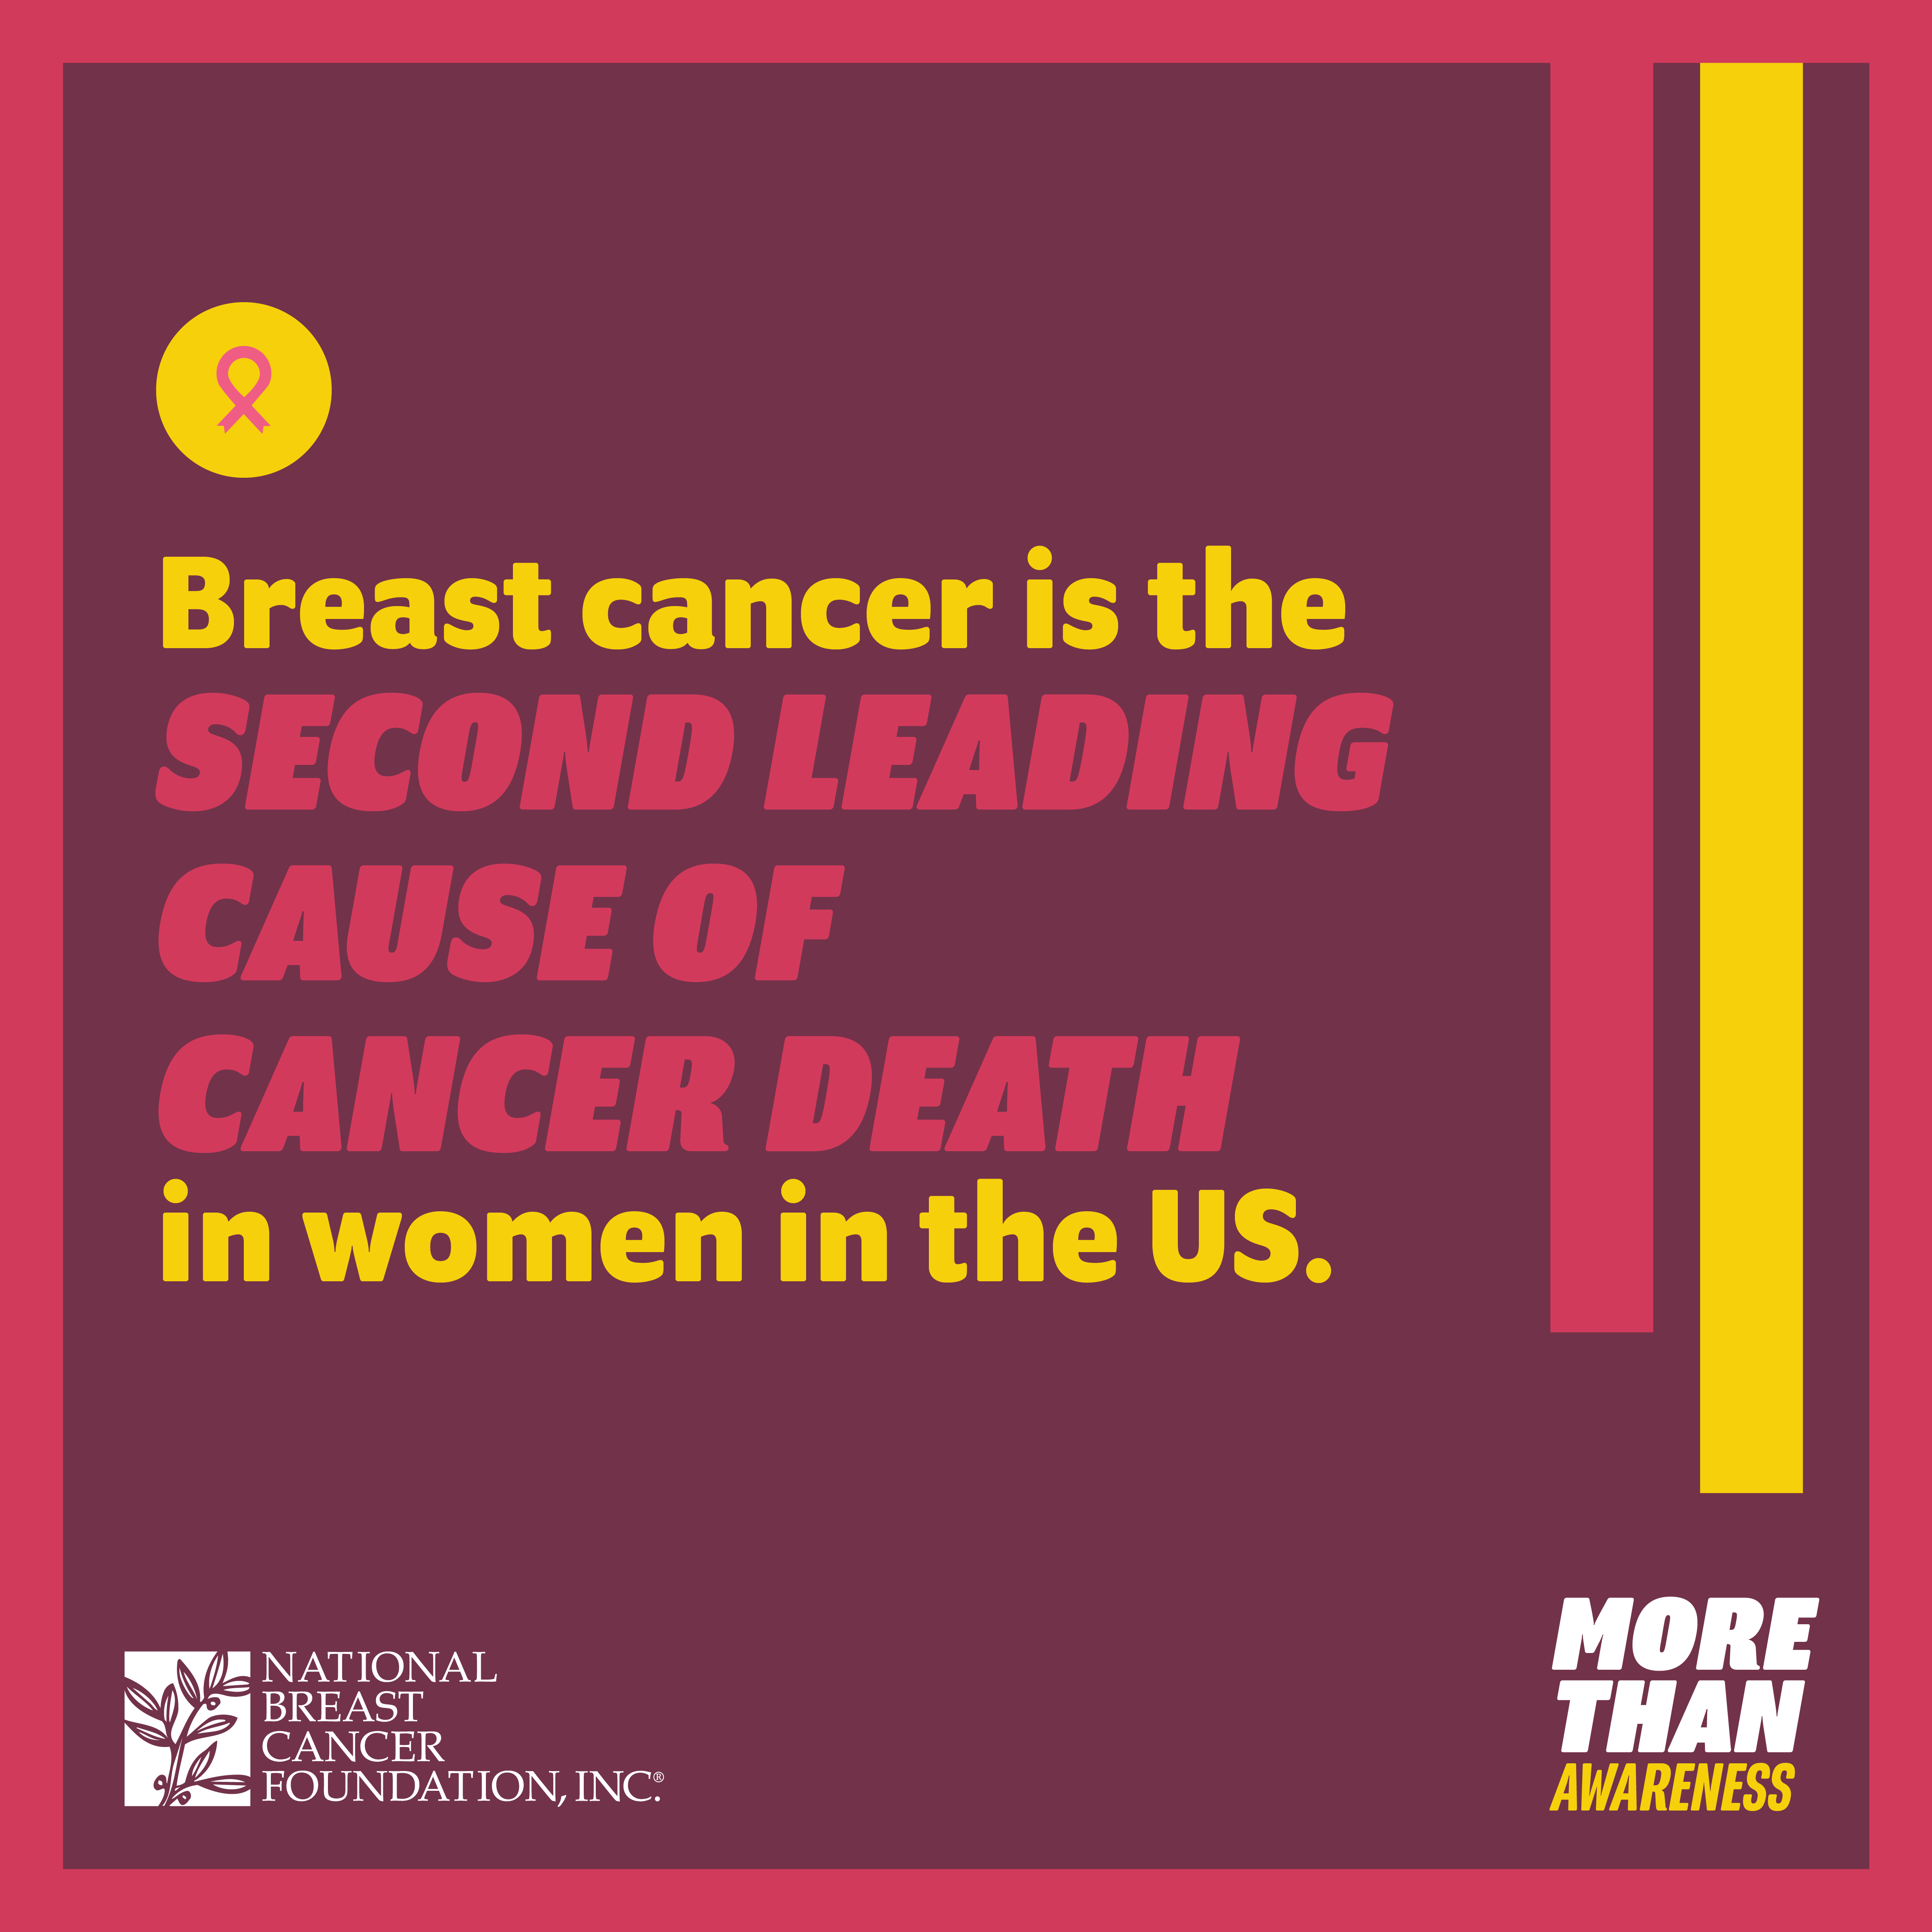 Breast cancer is the second leading cause of cancer death in women in the U.S.